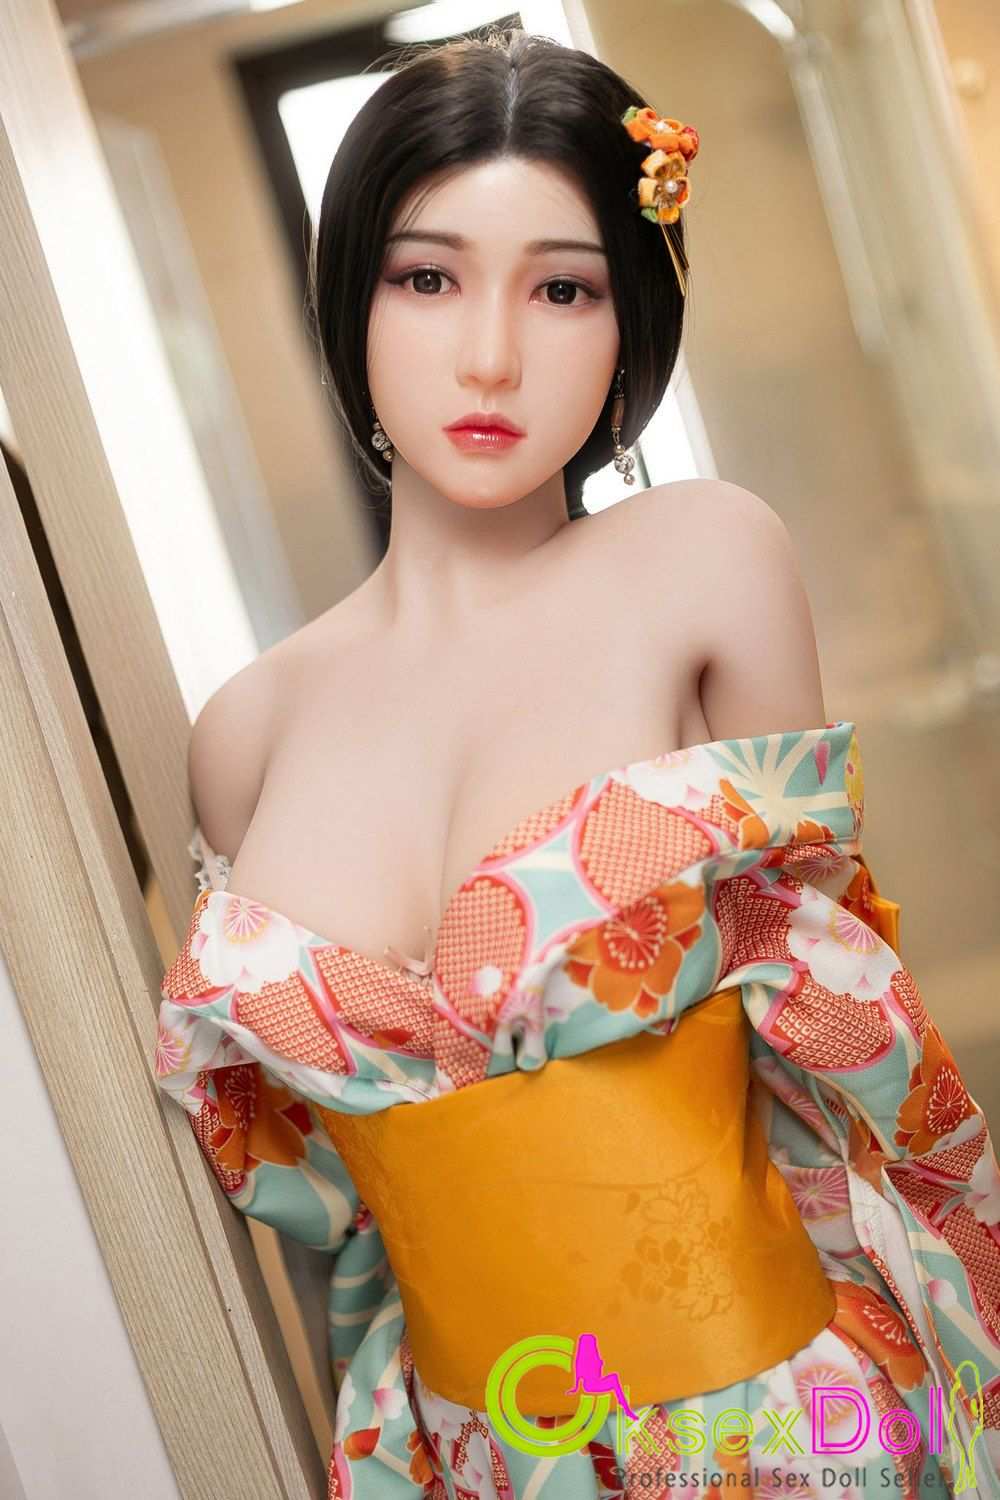 Beautiful Sex Doll Images of Mikan